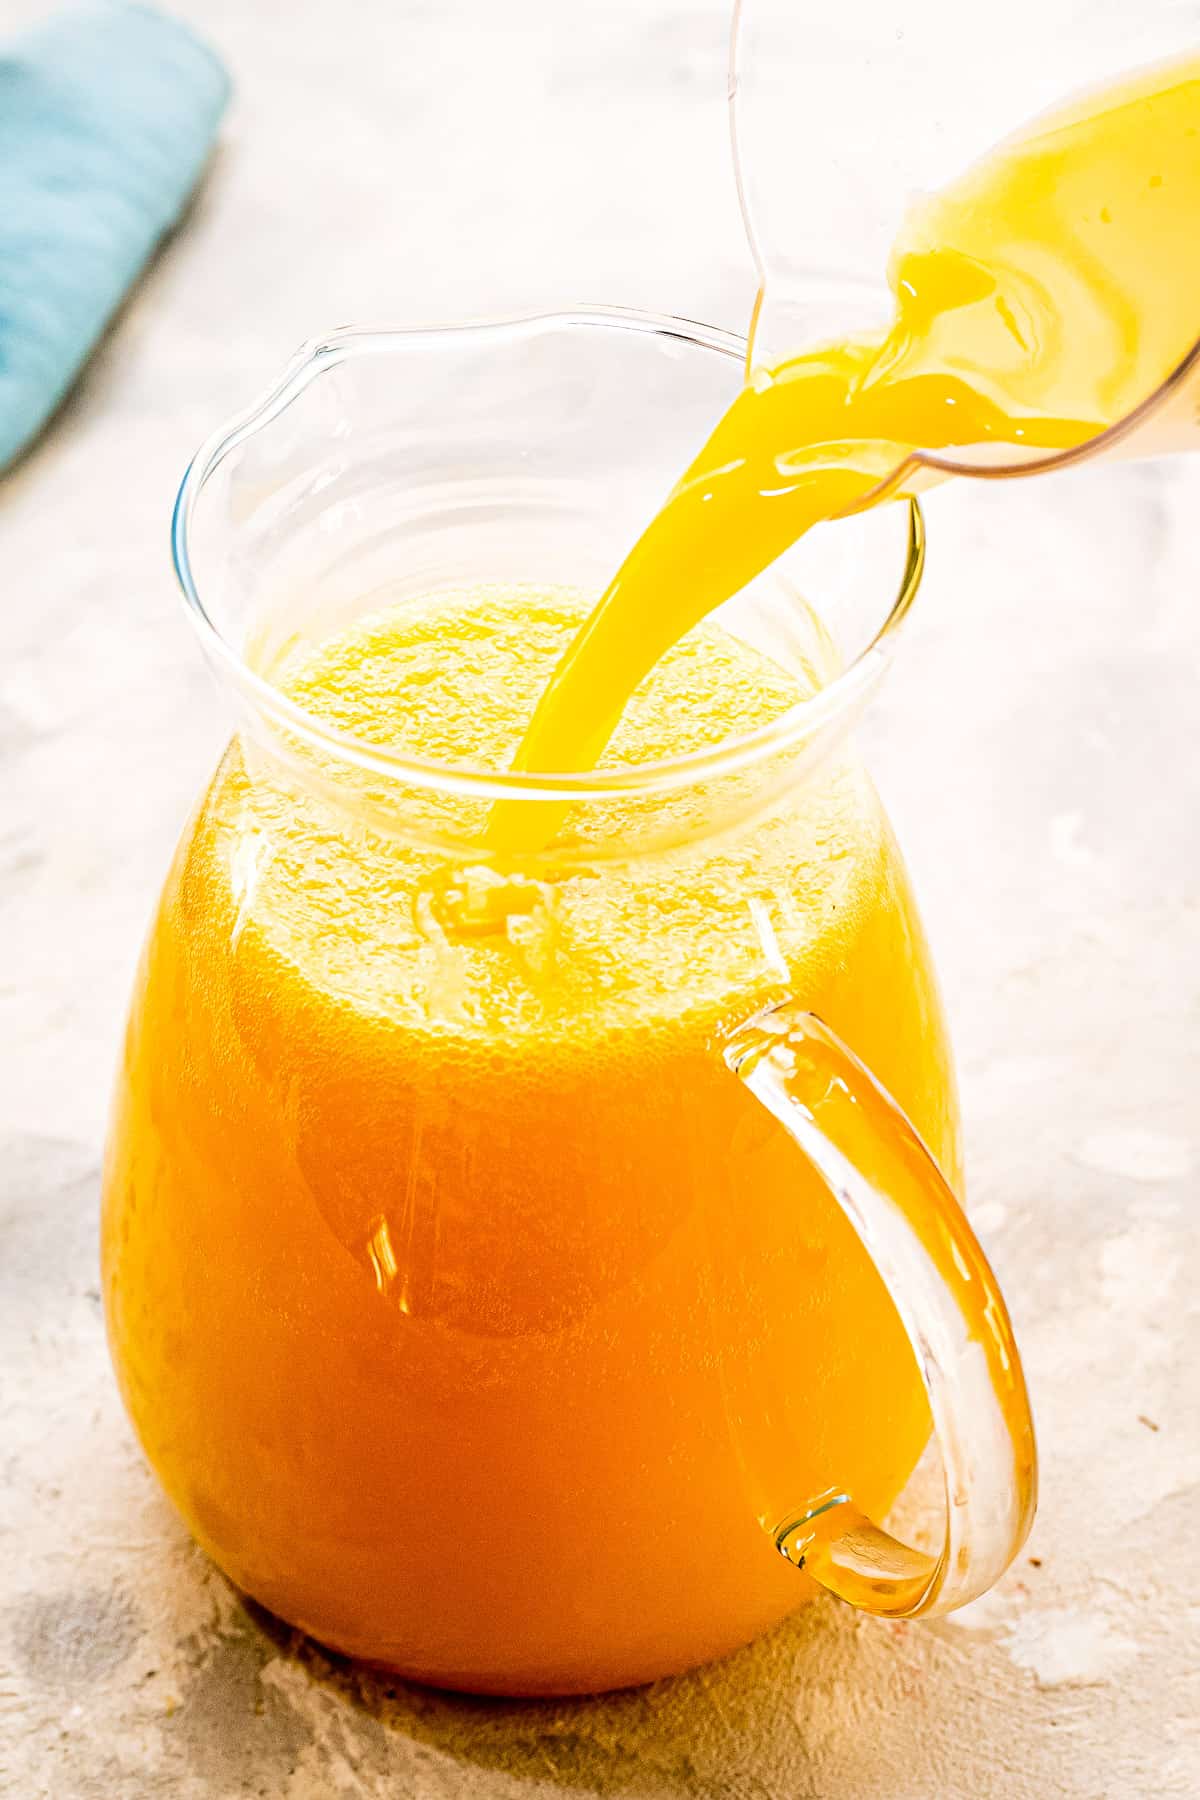 Pouring orange juice into a pitcher